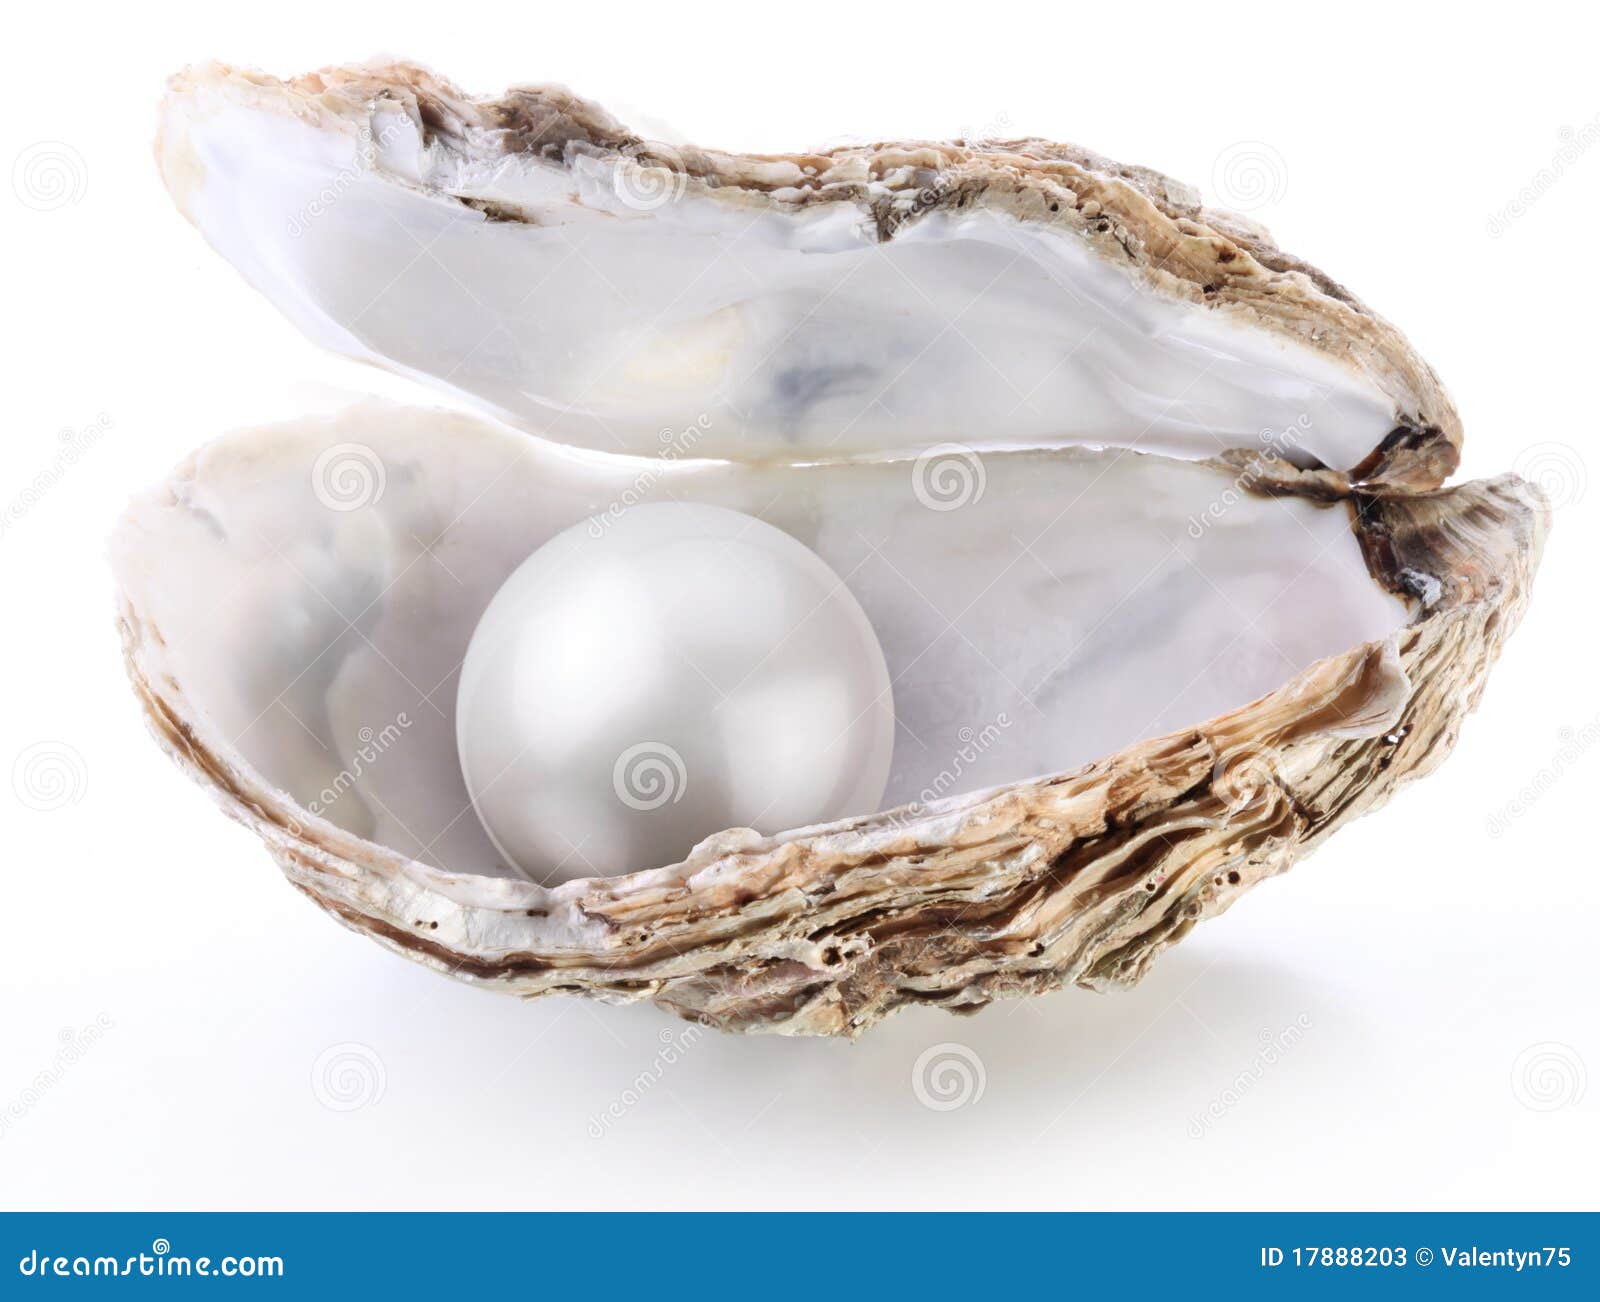 image of a white pearl in a shell on a white